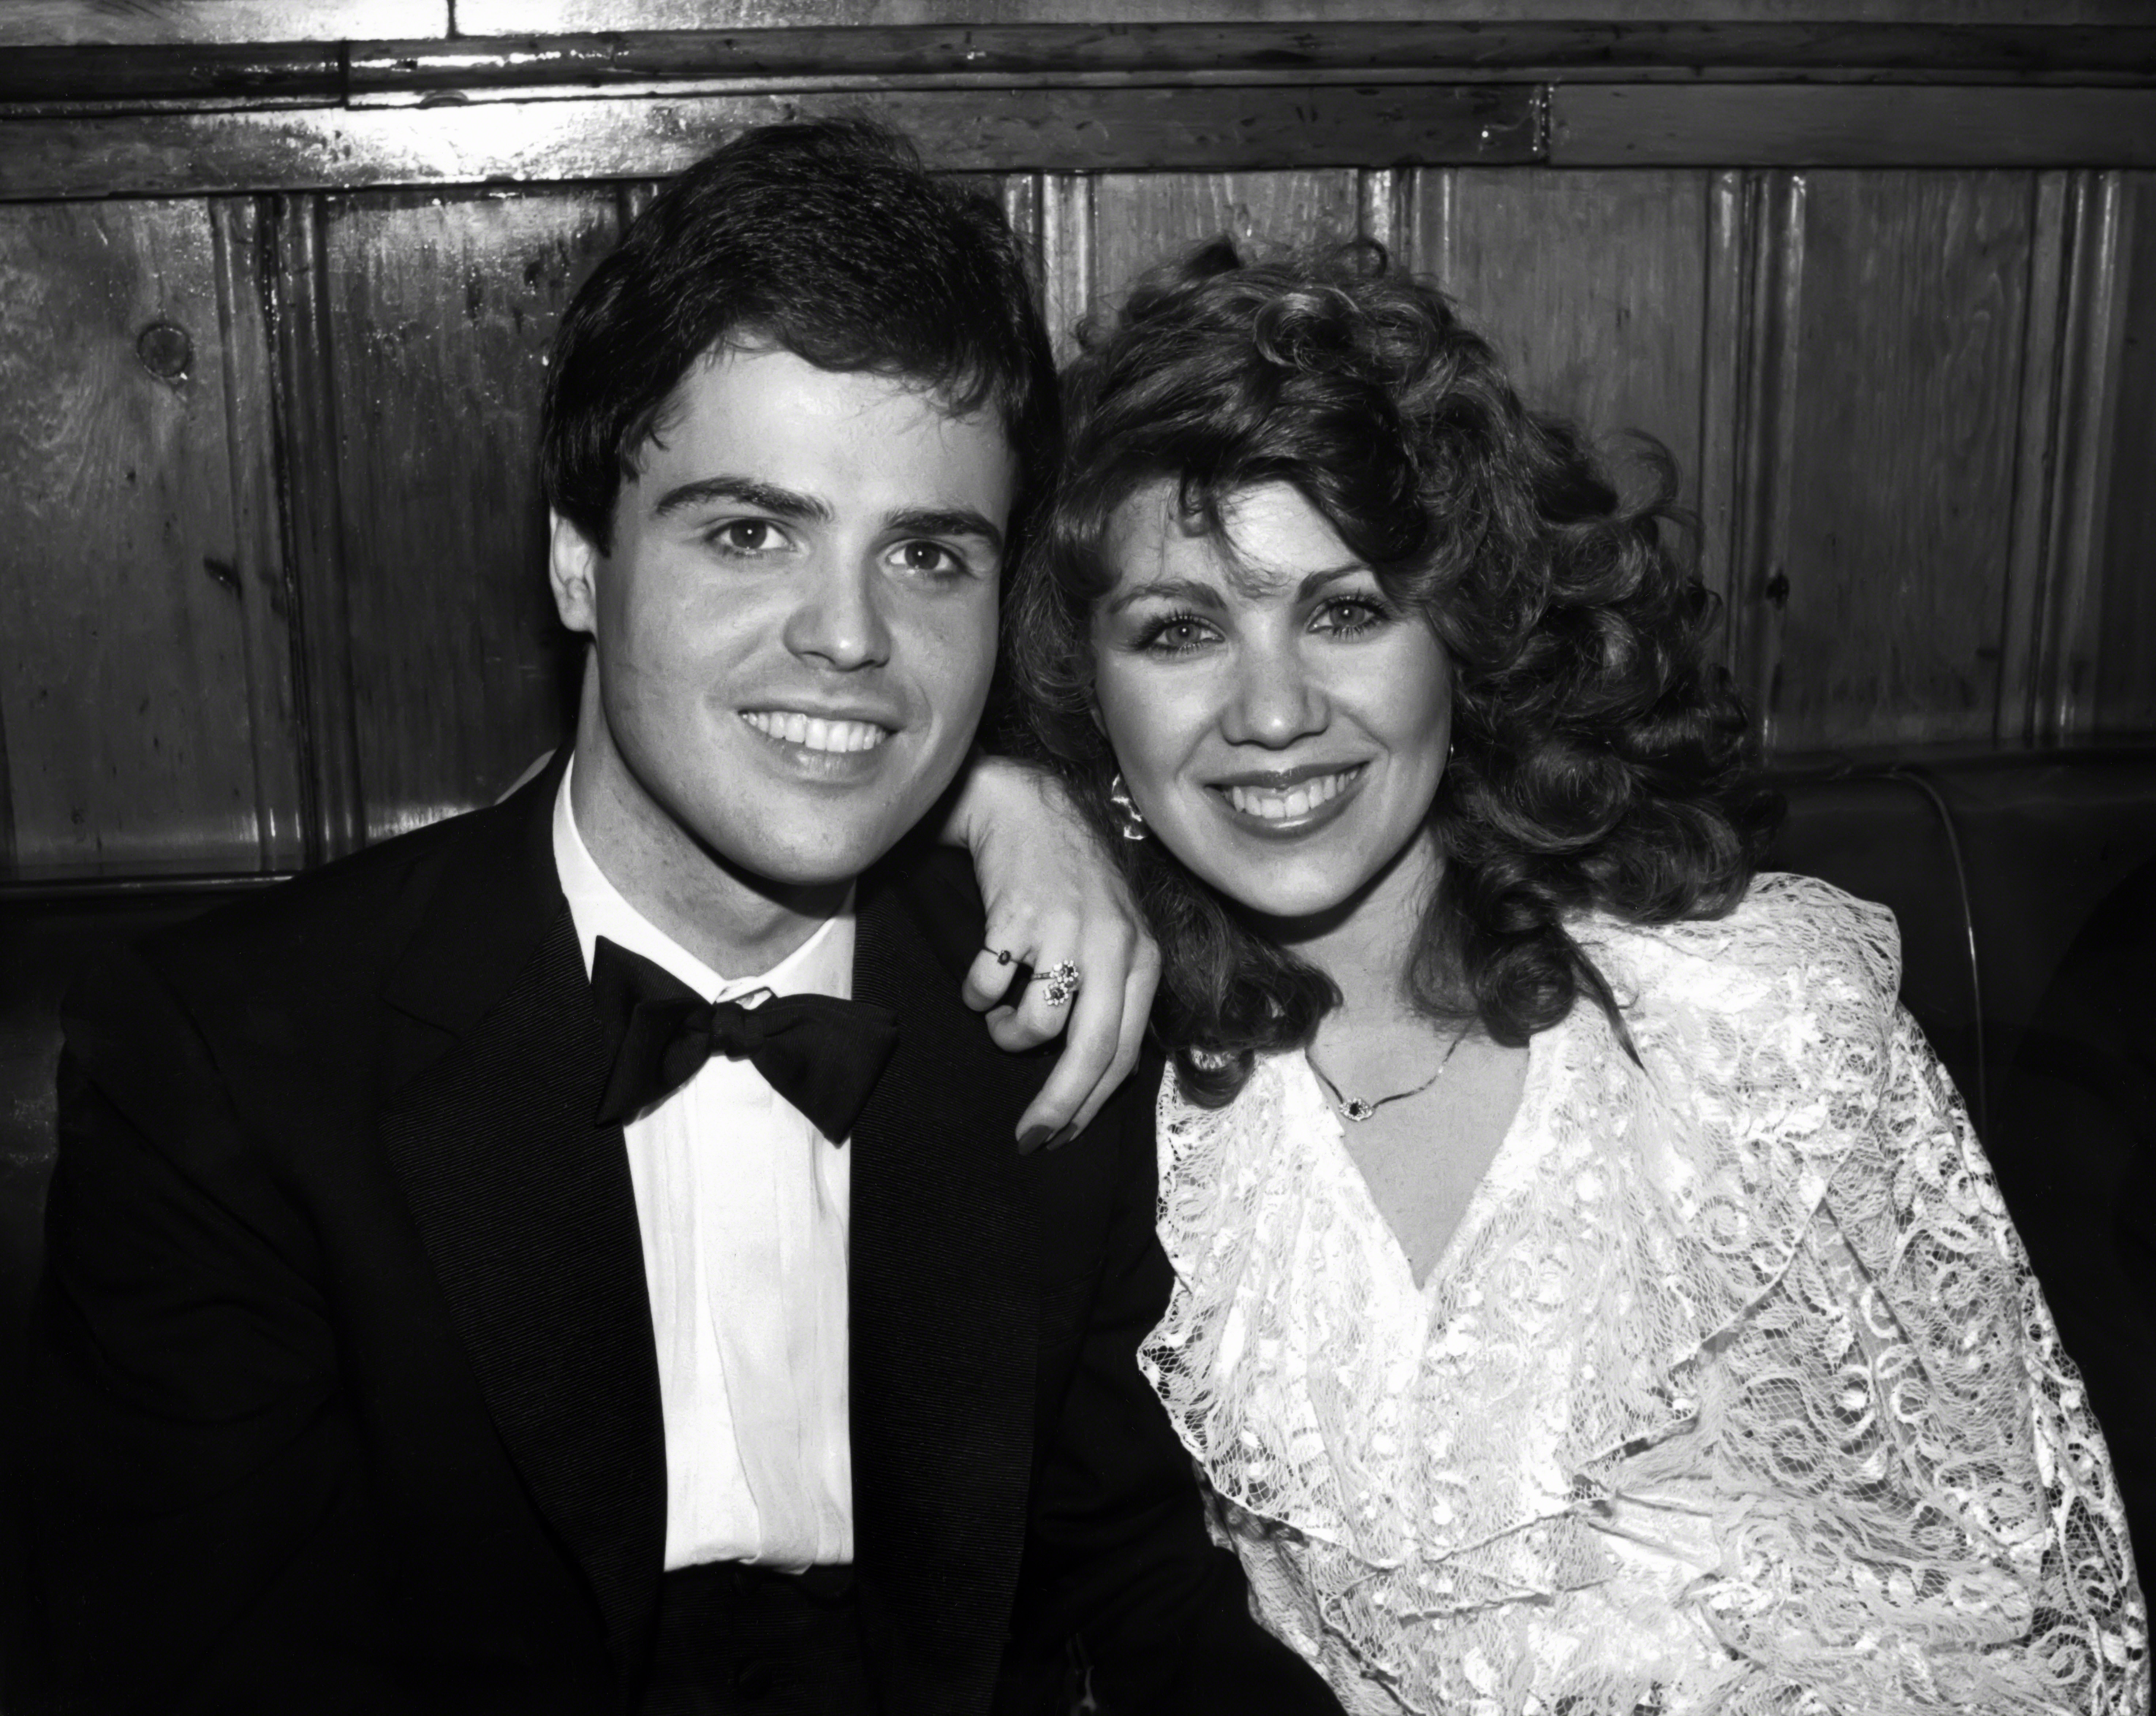 Donny Osmond and wife Debbie circa 1982 in New York City | Source: Getty Images